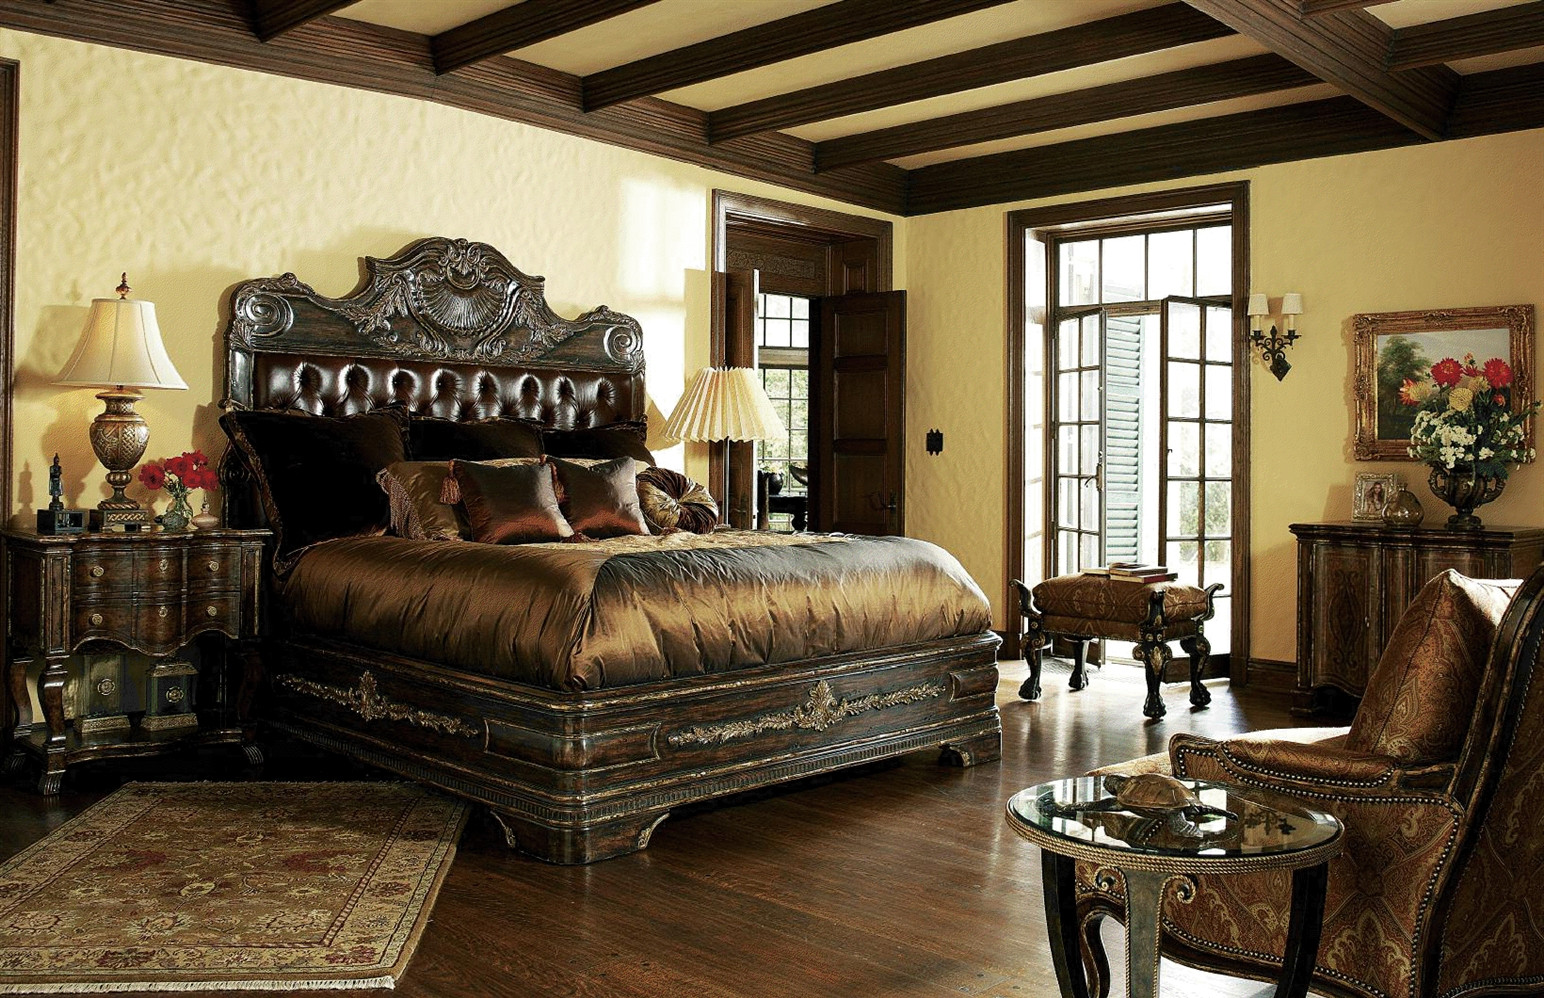 Luxurious Master Bedroom Furniture
 1 High end master bedroom set carvings and tufted leather